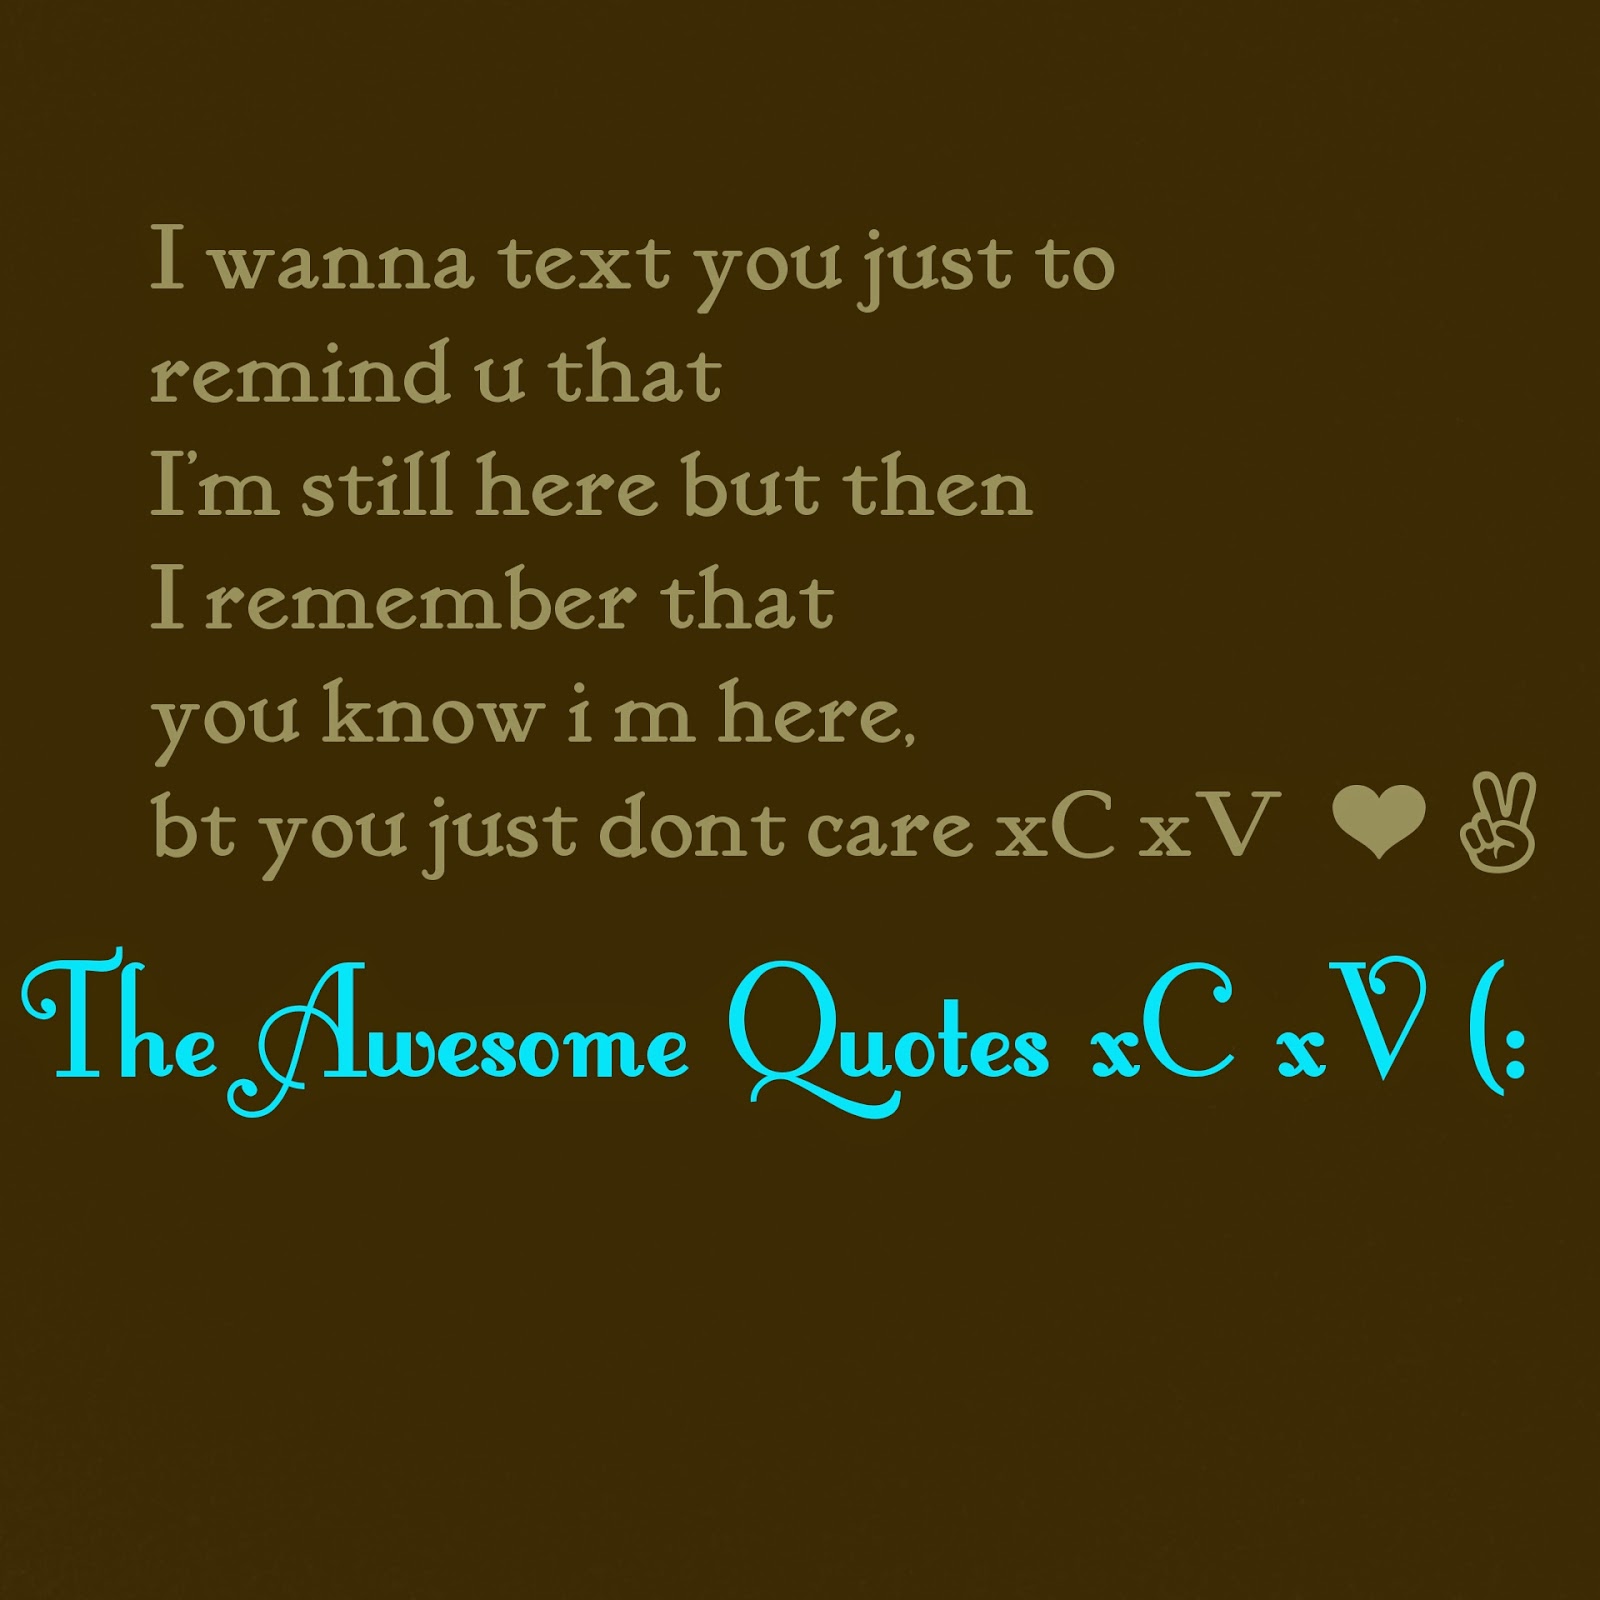 The Awesome Quotes